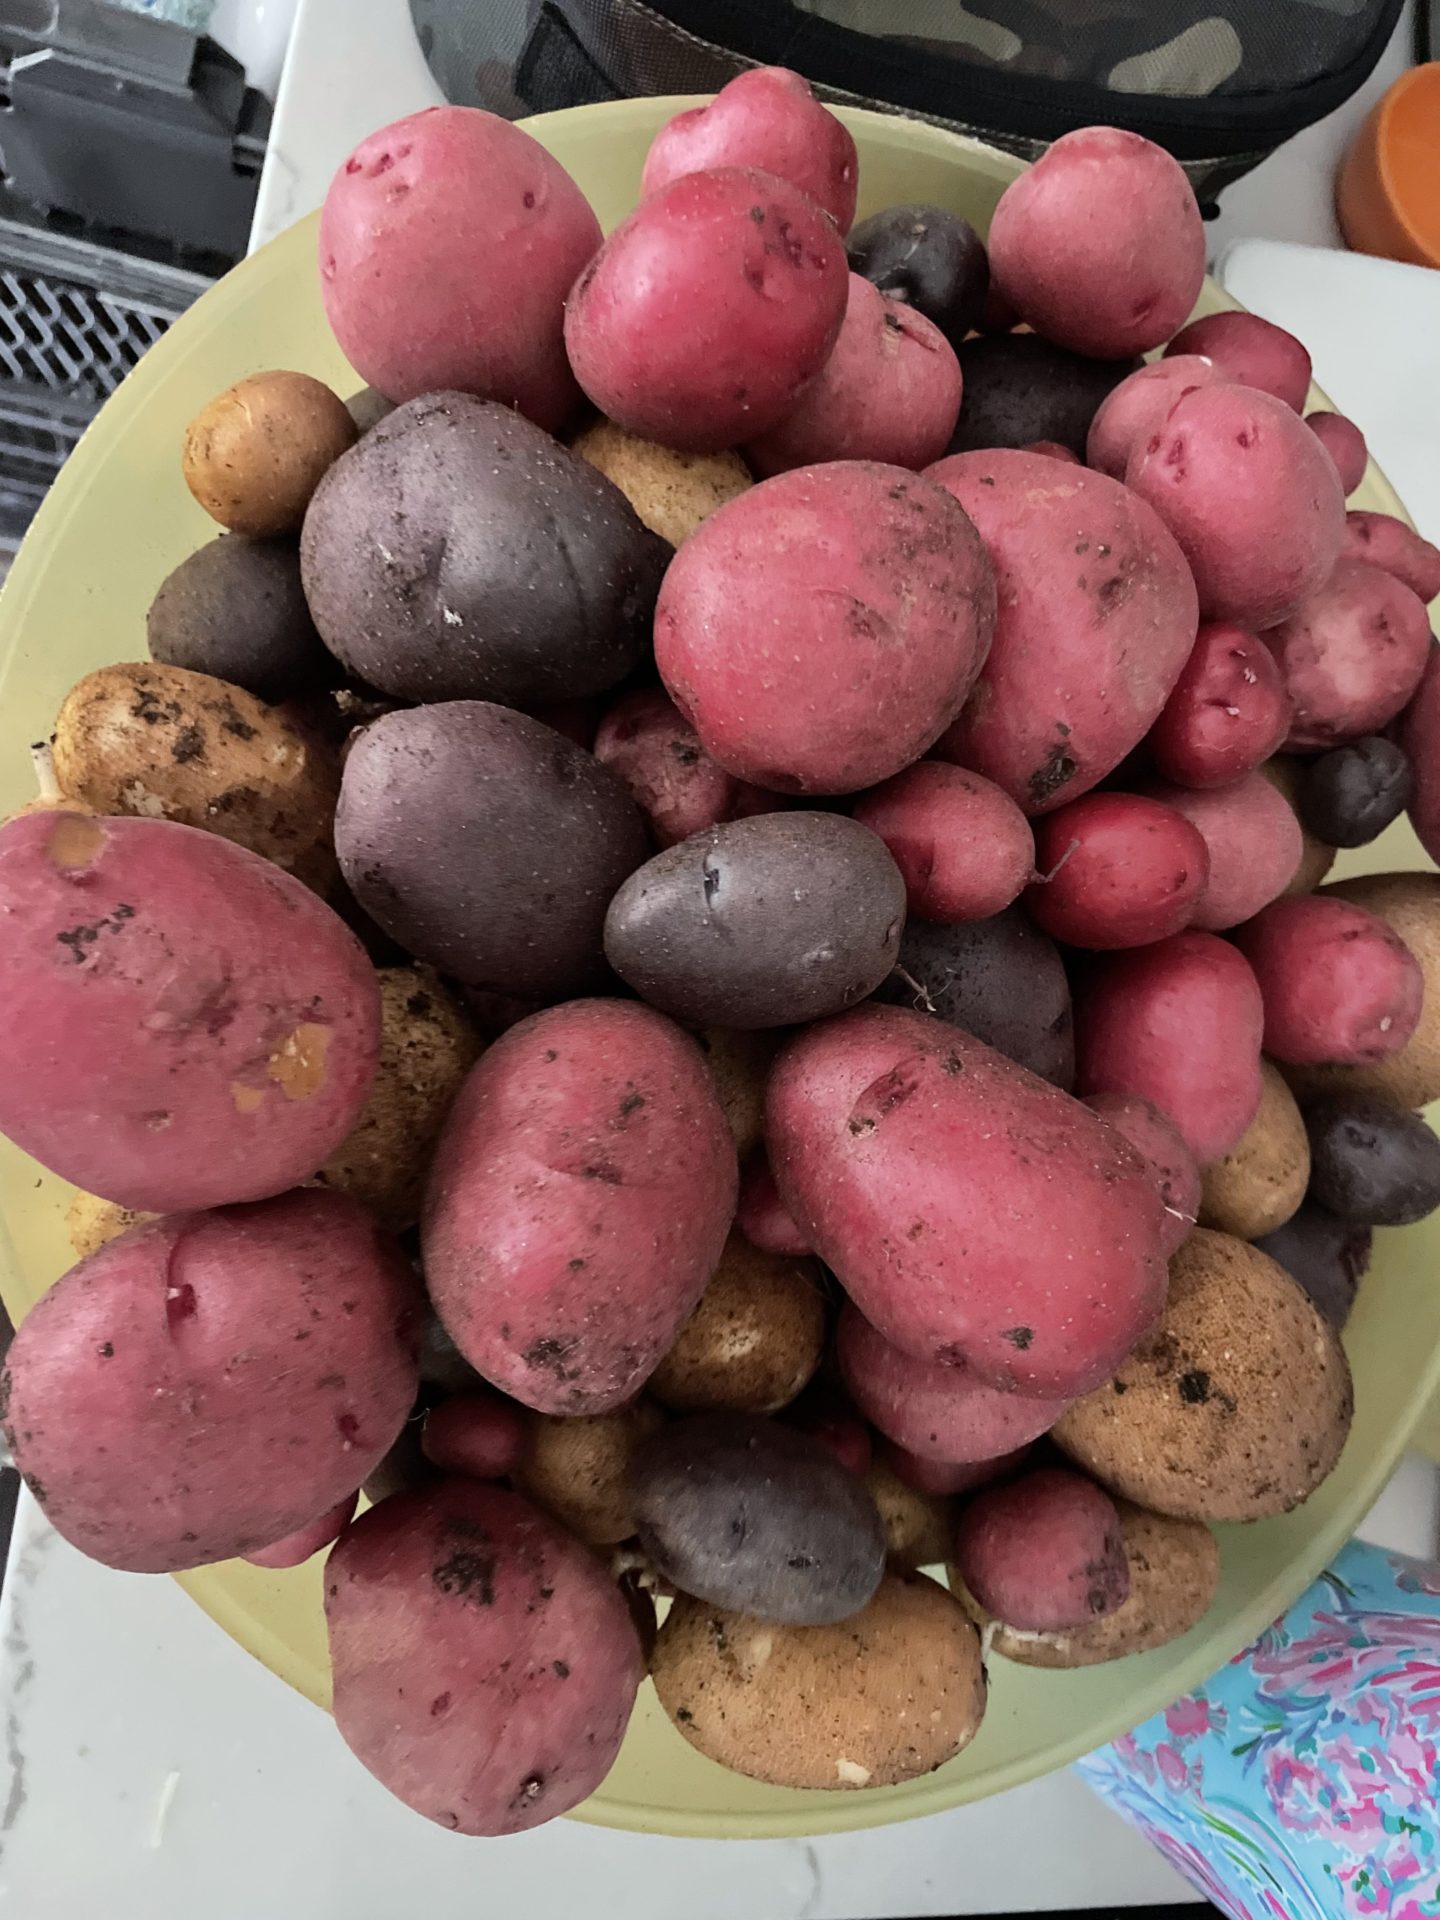 A close up picture of potatoes harvested from the garden.